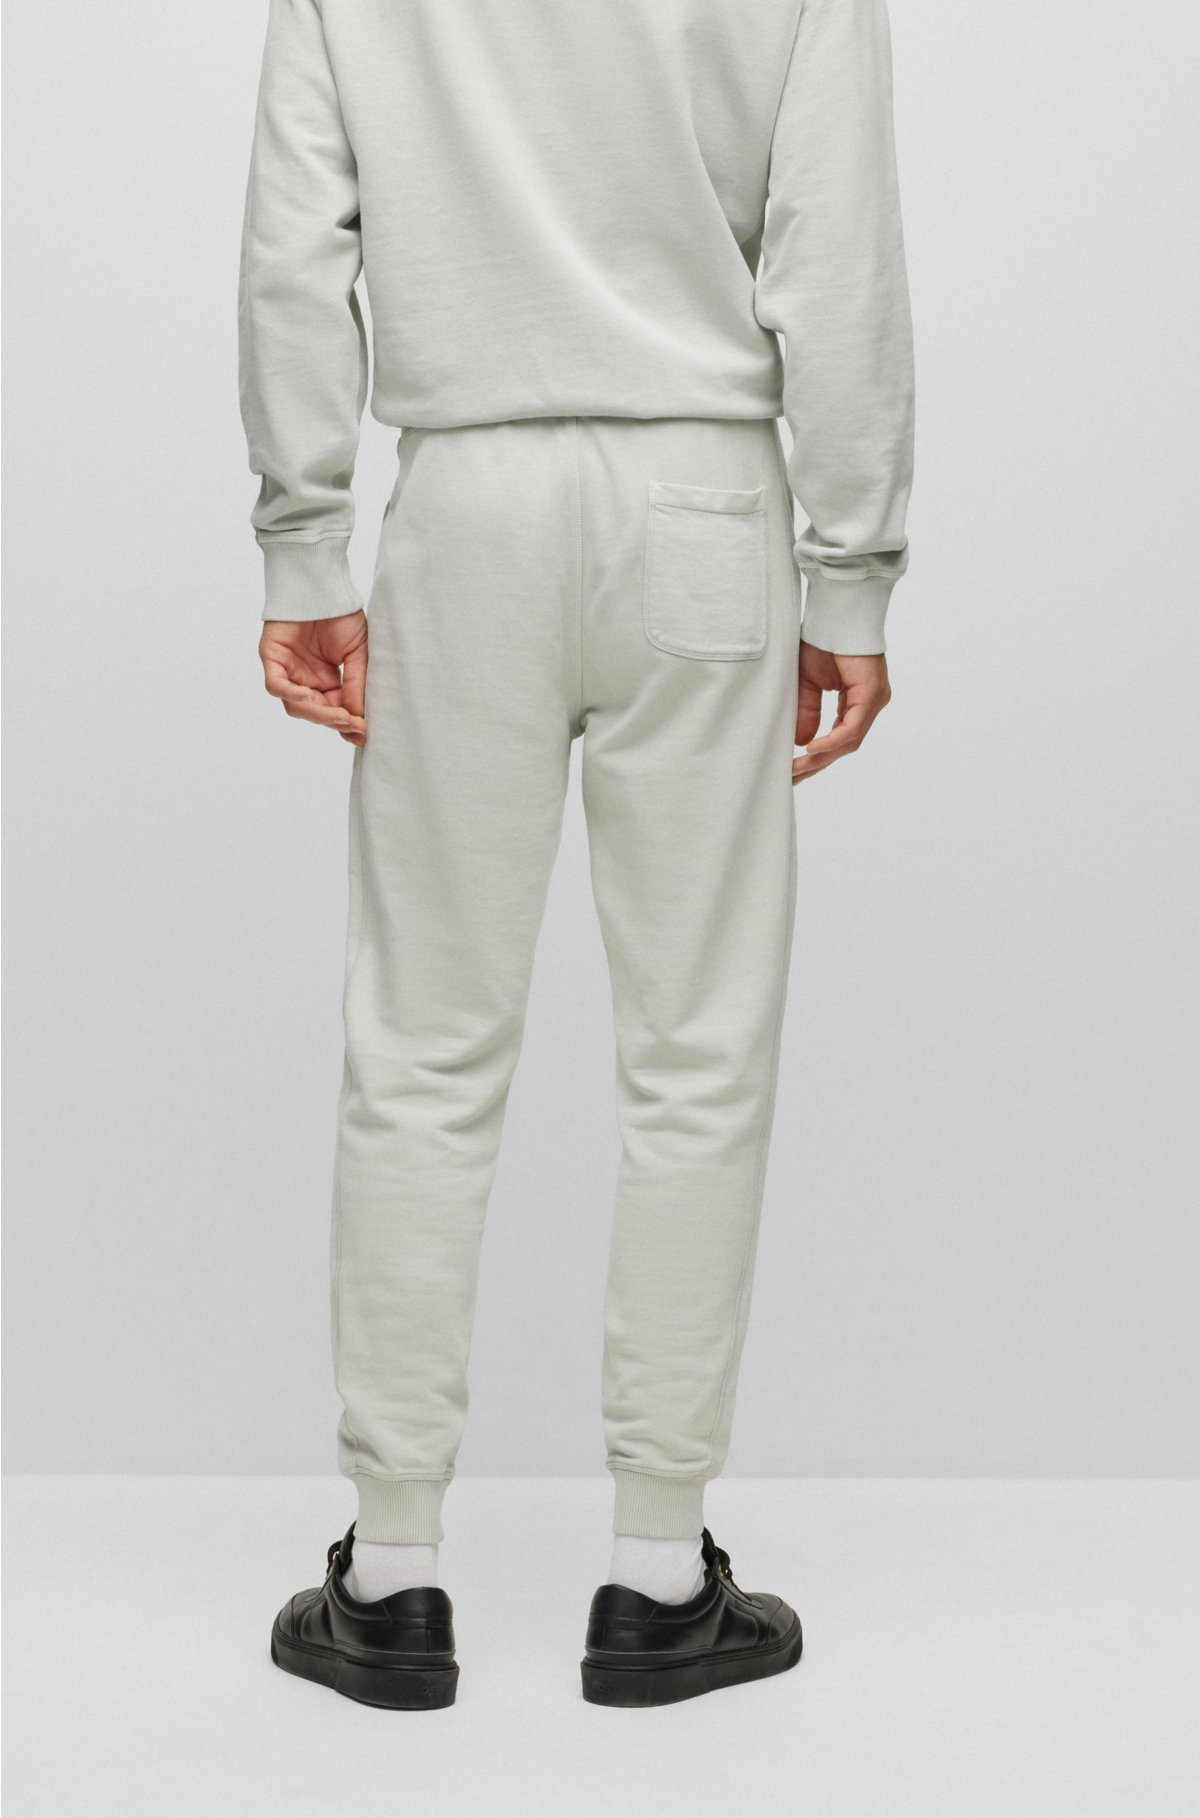 Alegrarse girar farmacéutico BOSS - Relaxed-fit tracksuit bottoms in French-terry cotton